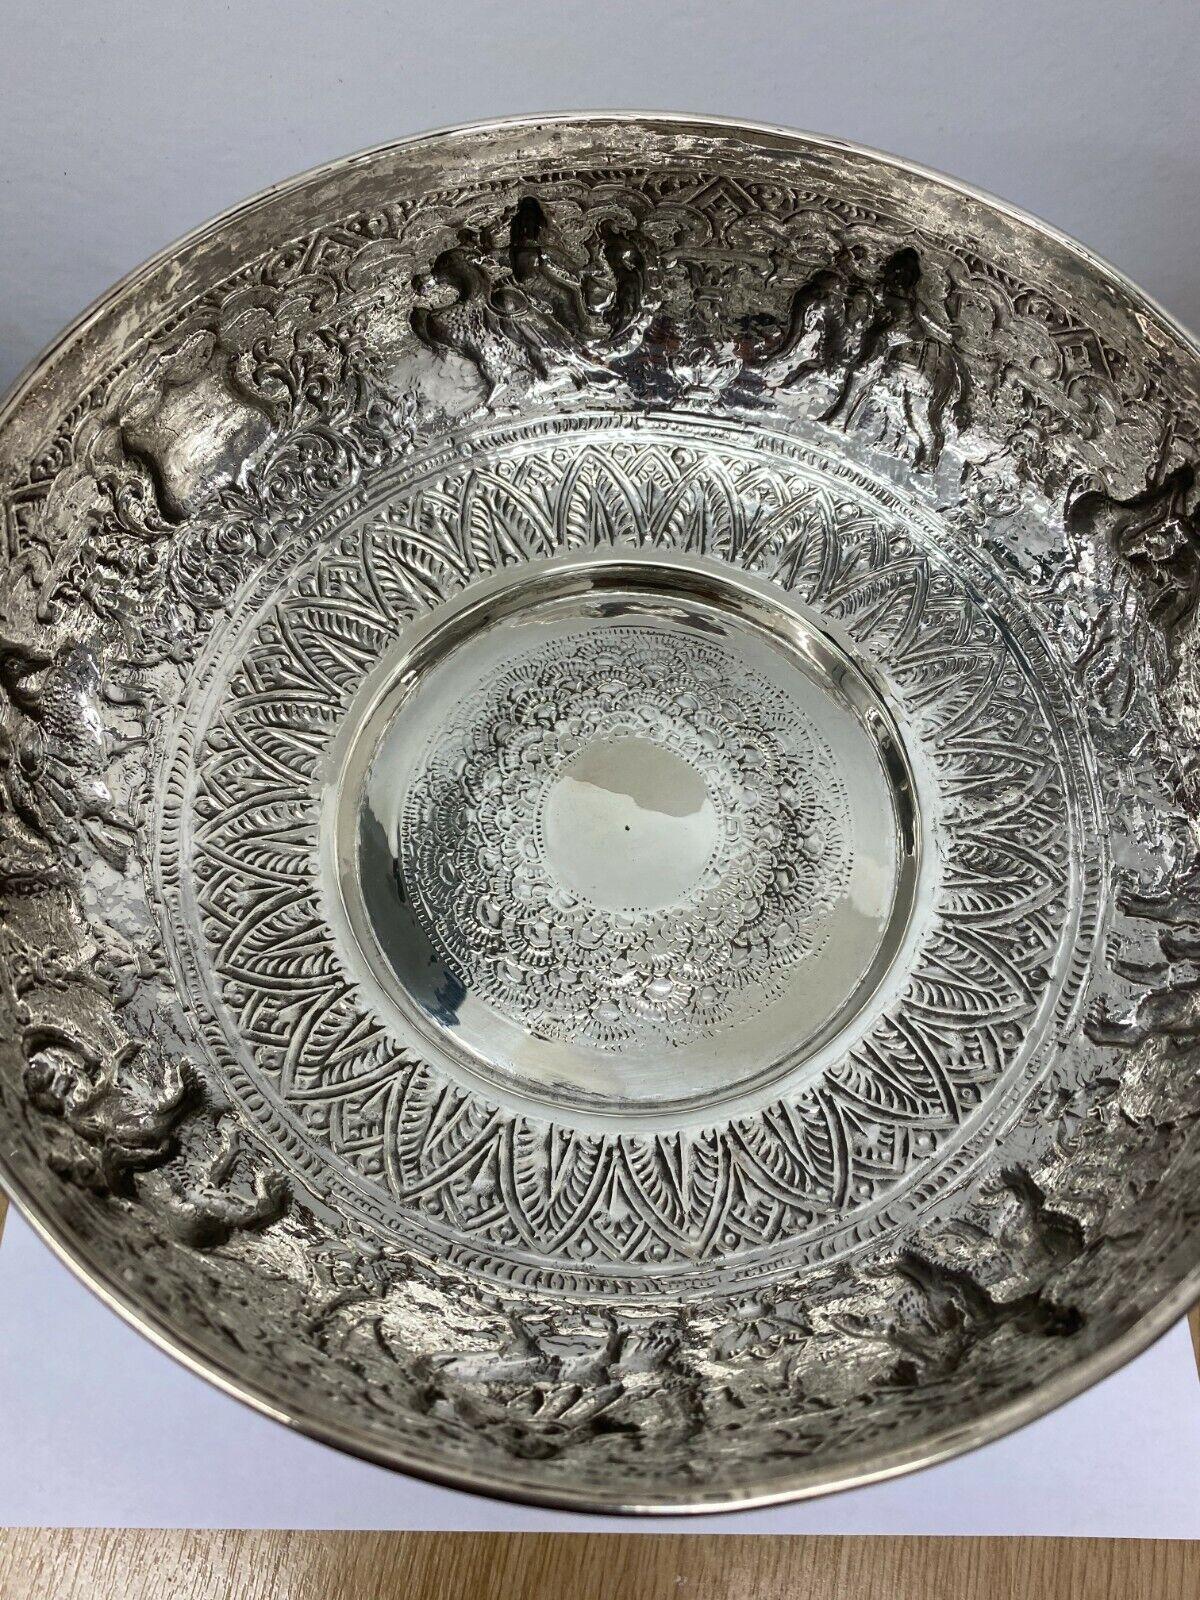 Antique Indian Lucknow Silver Repousse Hunting Scenes Pedestal Bowl or Trophy

In excellent condition. A late 19th or early 20th century Raj period silver bowl from India. It is of pedestal form and has a vacant shield suggesting it was intended as